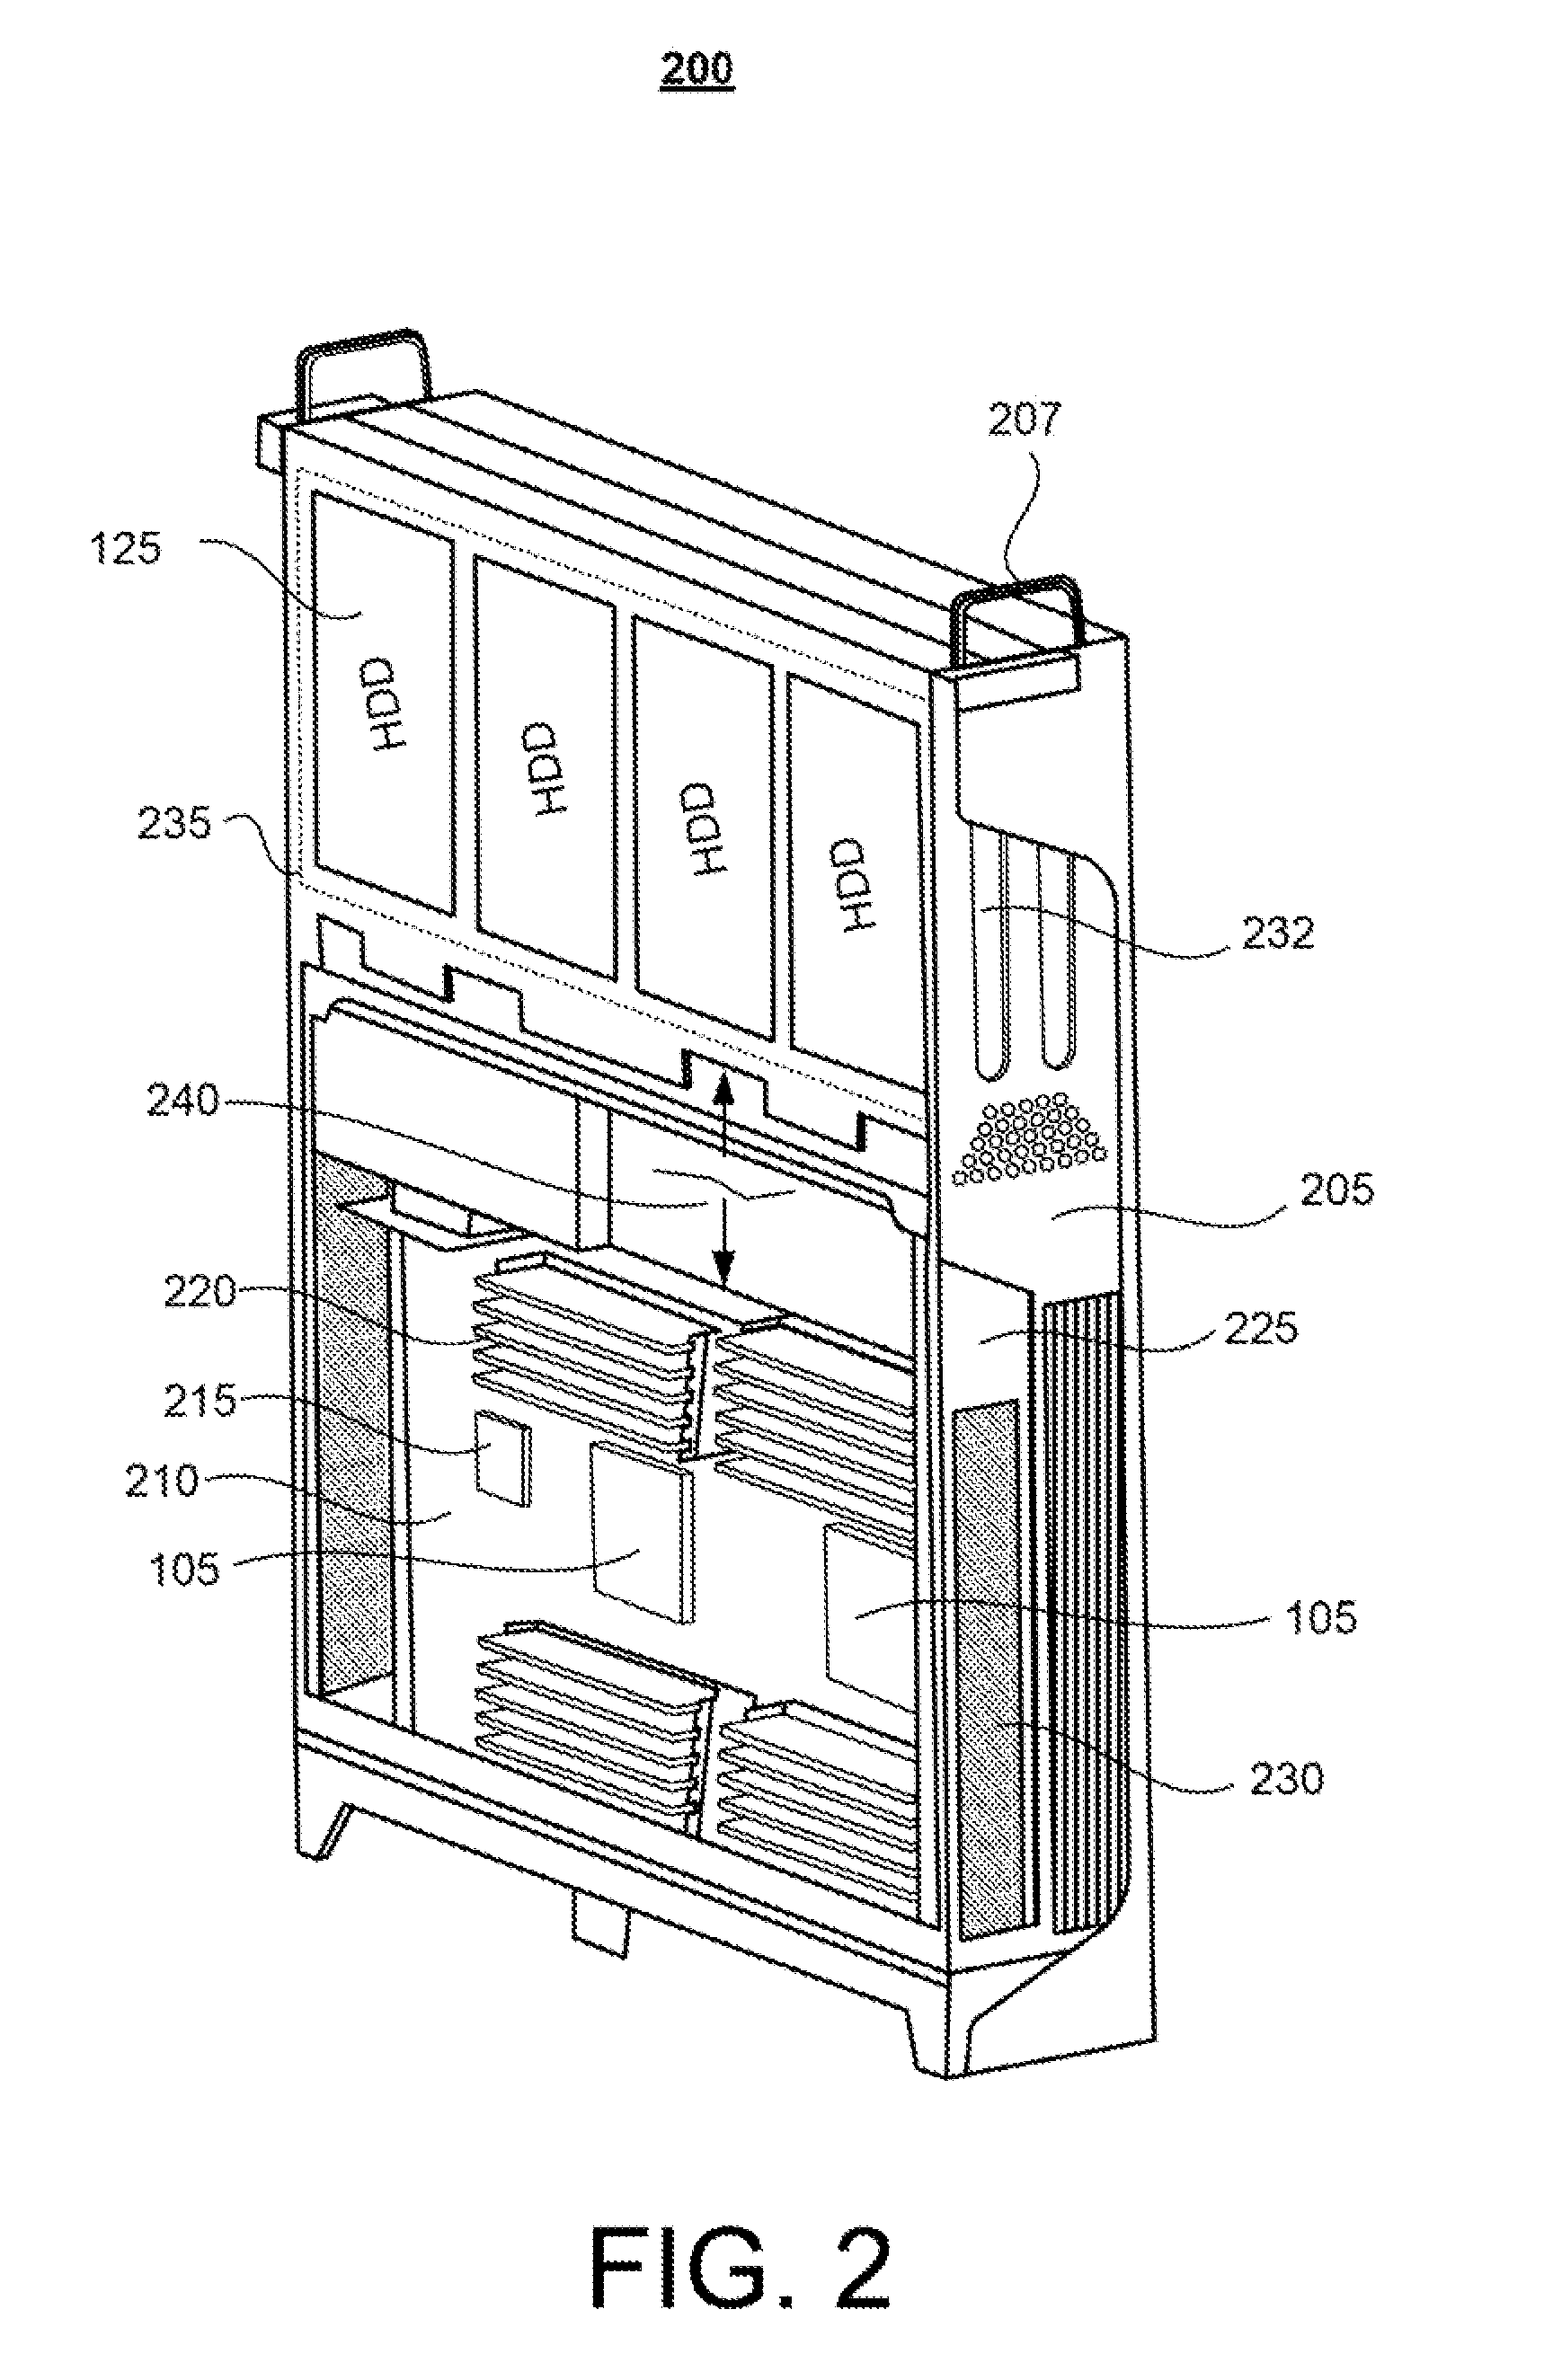 System for Cooling Hard Disk Drives Using Vapor Momentum Driven By Boiling of Dielectric Liquid